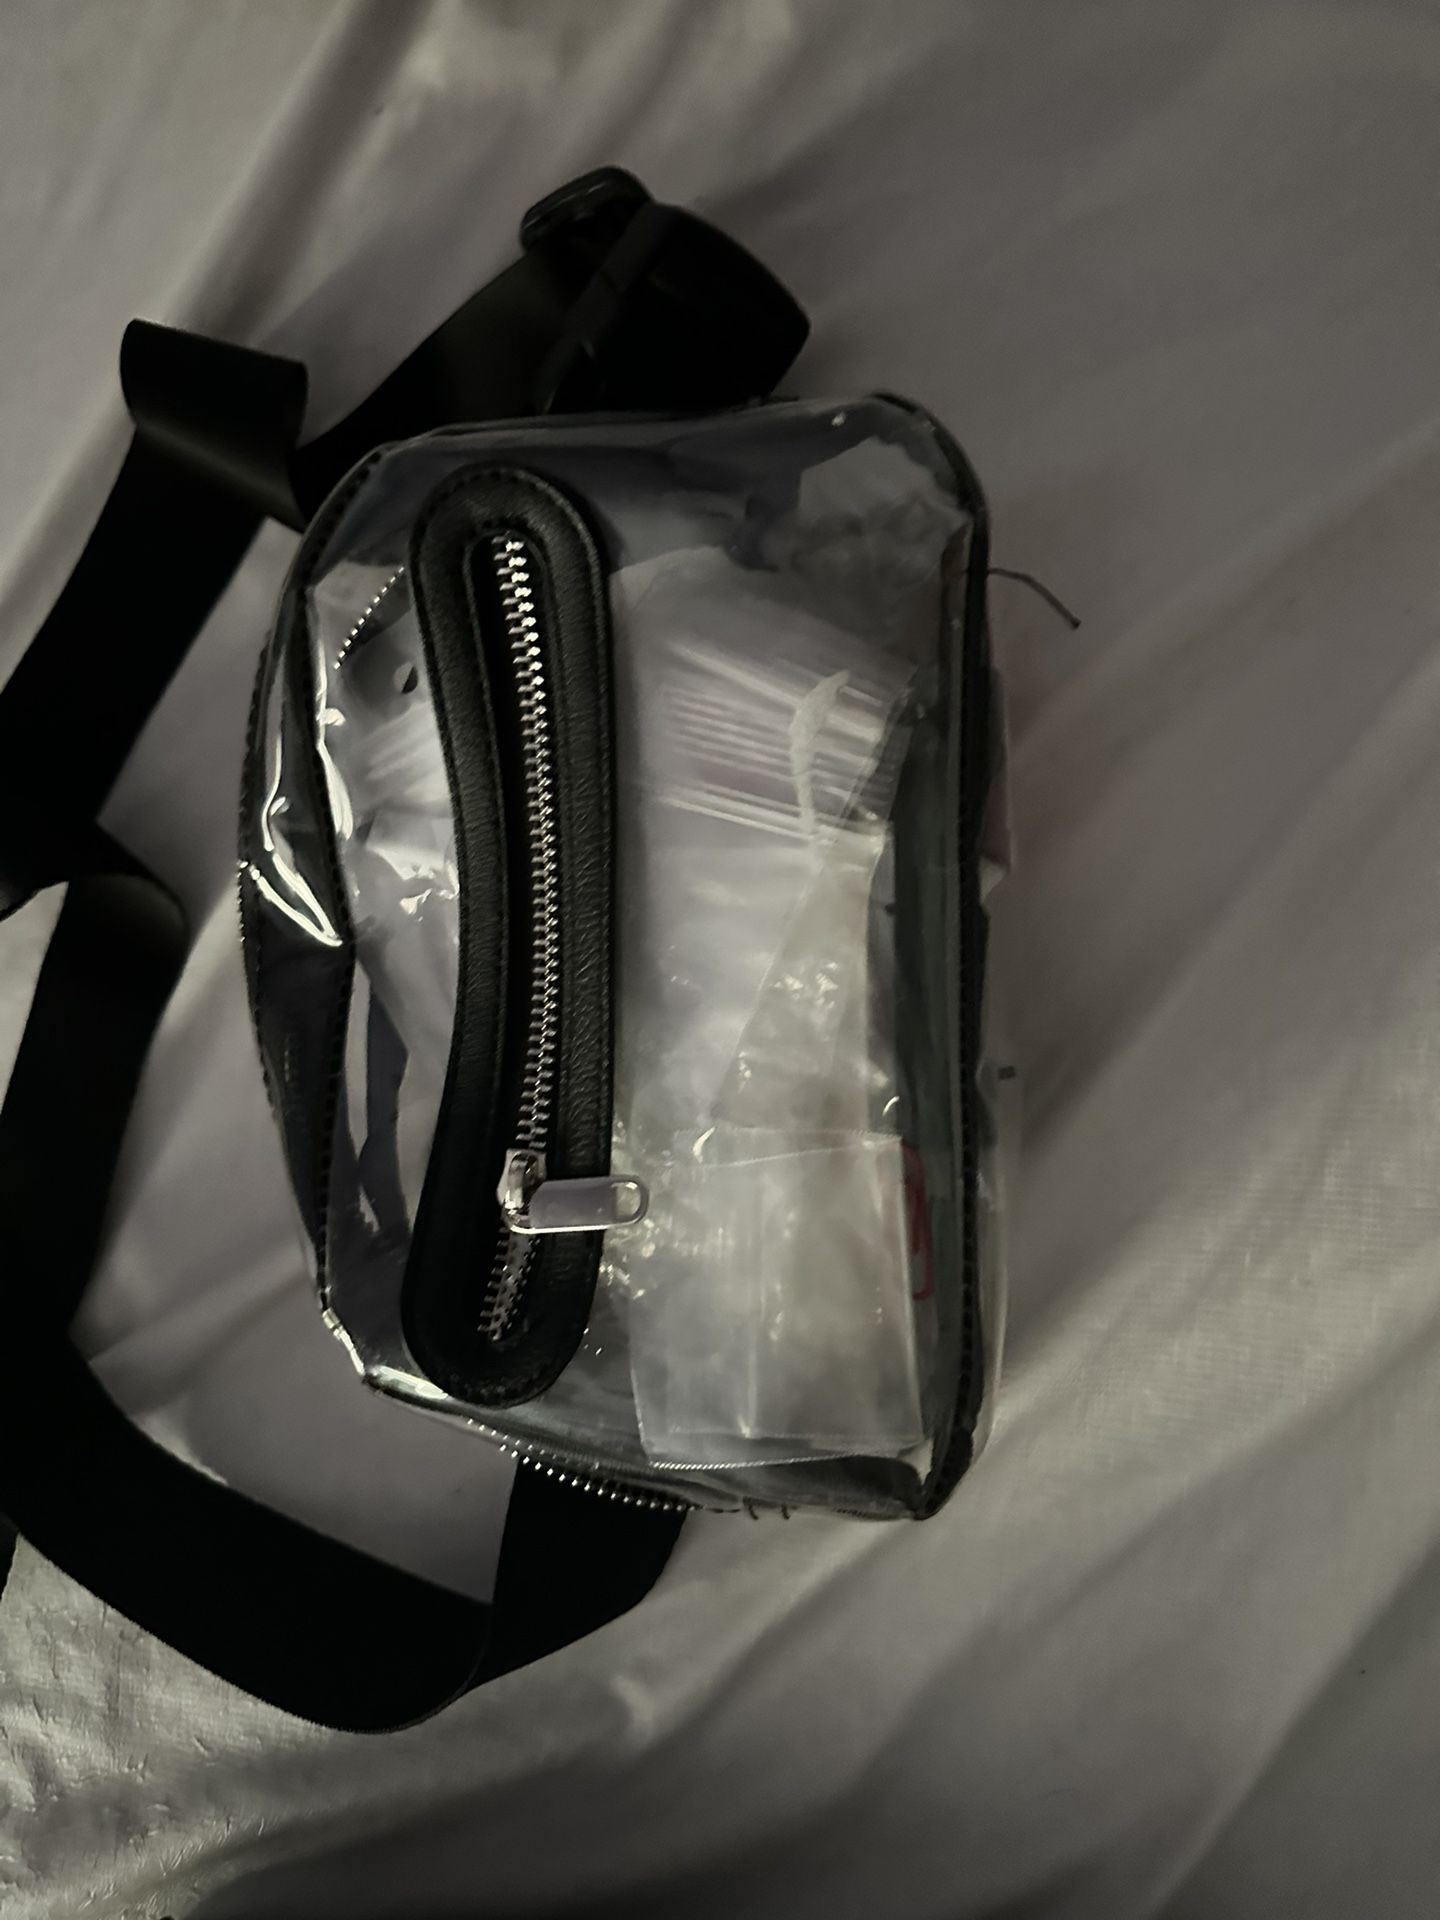 Clear Sling Chest Bag Waterproof Portable PVC Zipper Closure Reinforced Seams Clear Waist Bag Adjustable Sports Strap for Travel (Black)